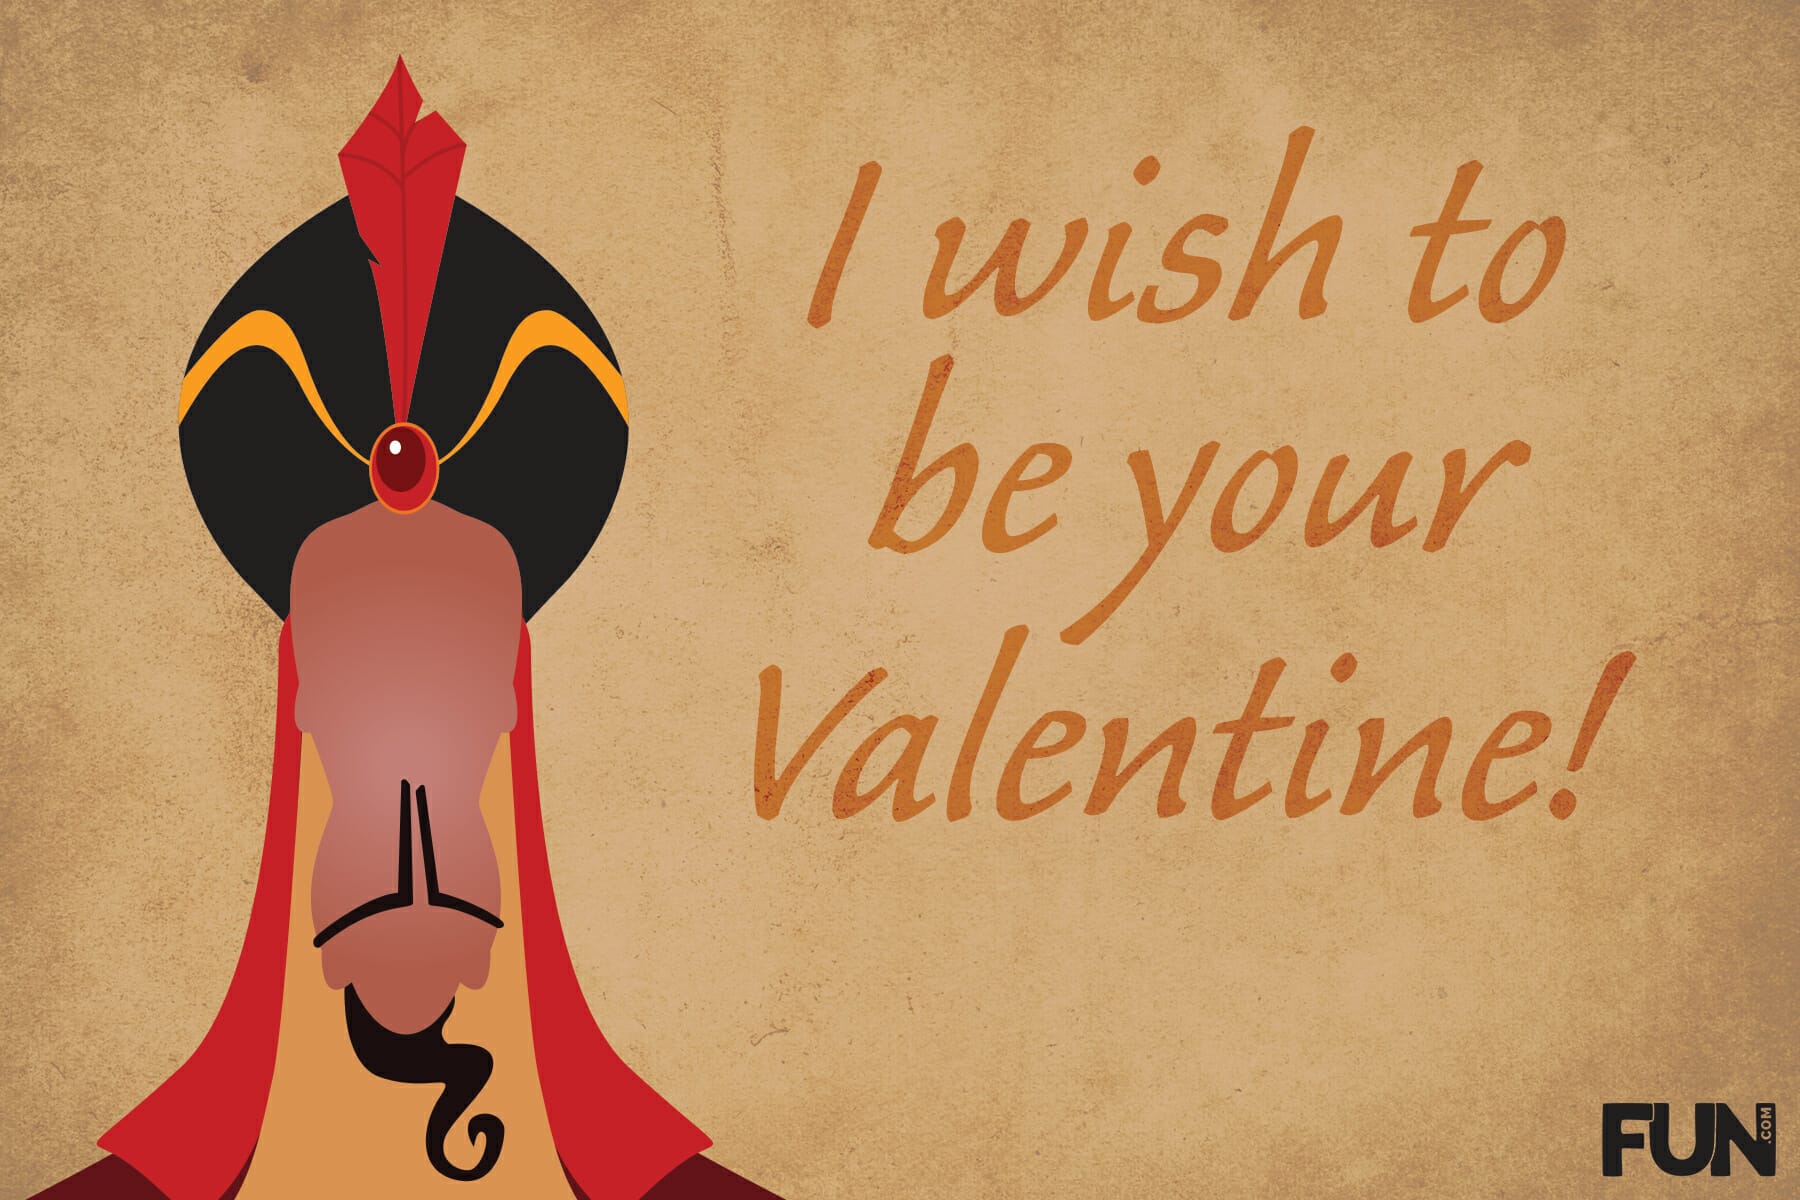 I wish to be your Valentine!